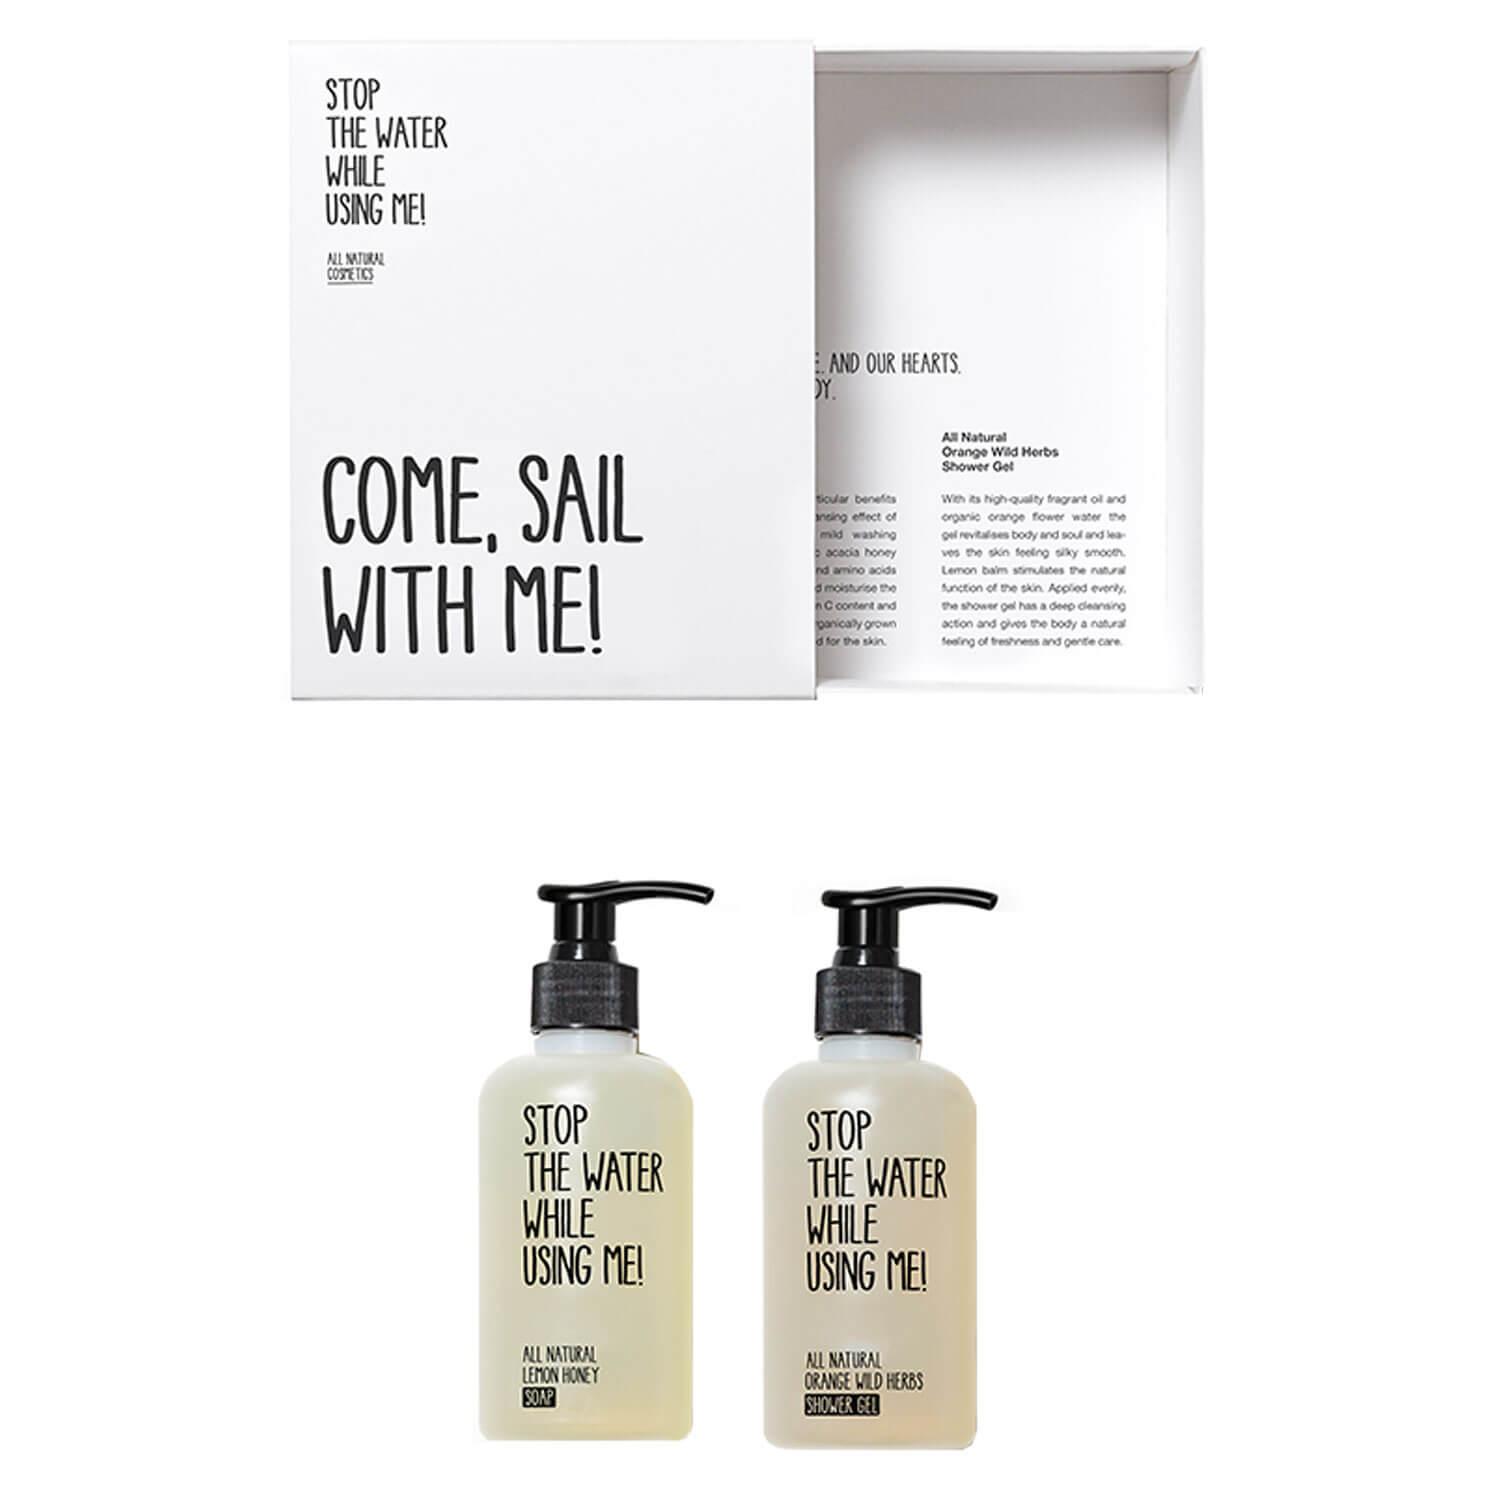 All Natural Body - Come, Sail With Me! Kit